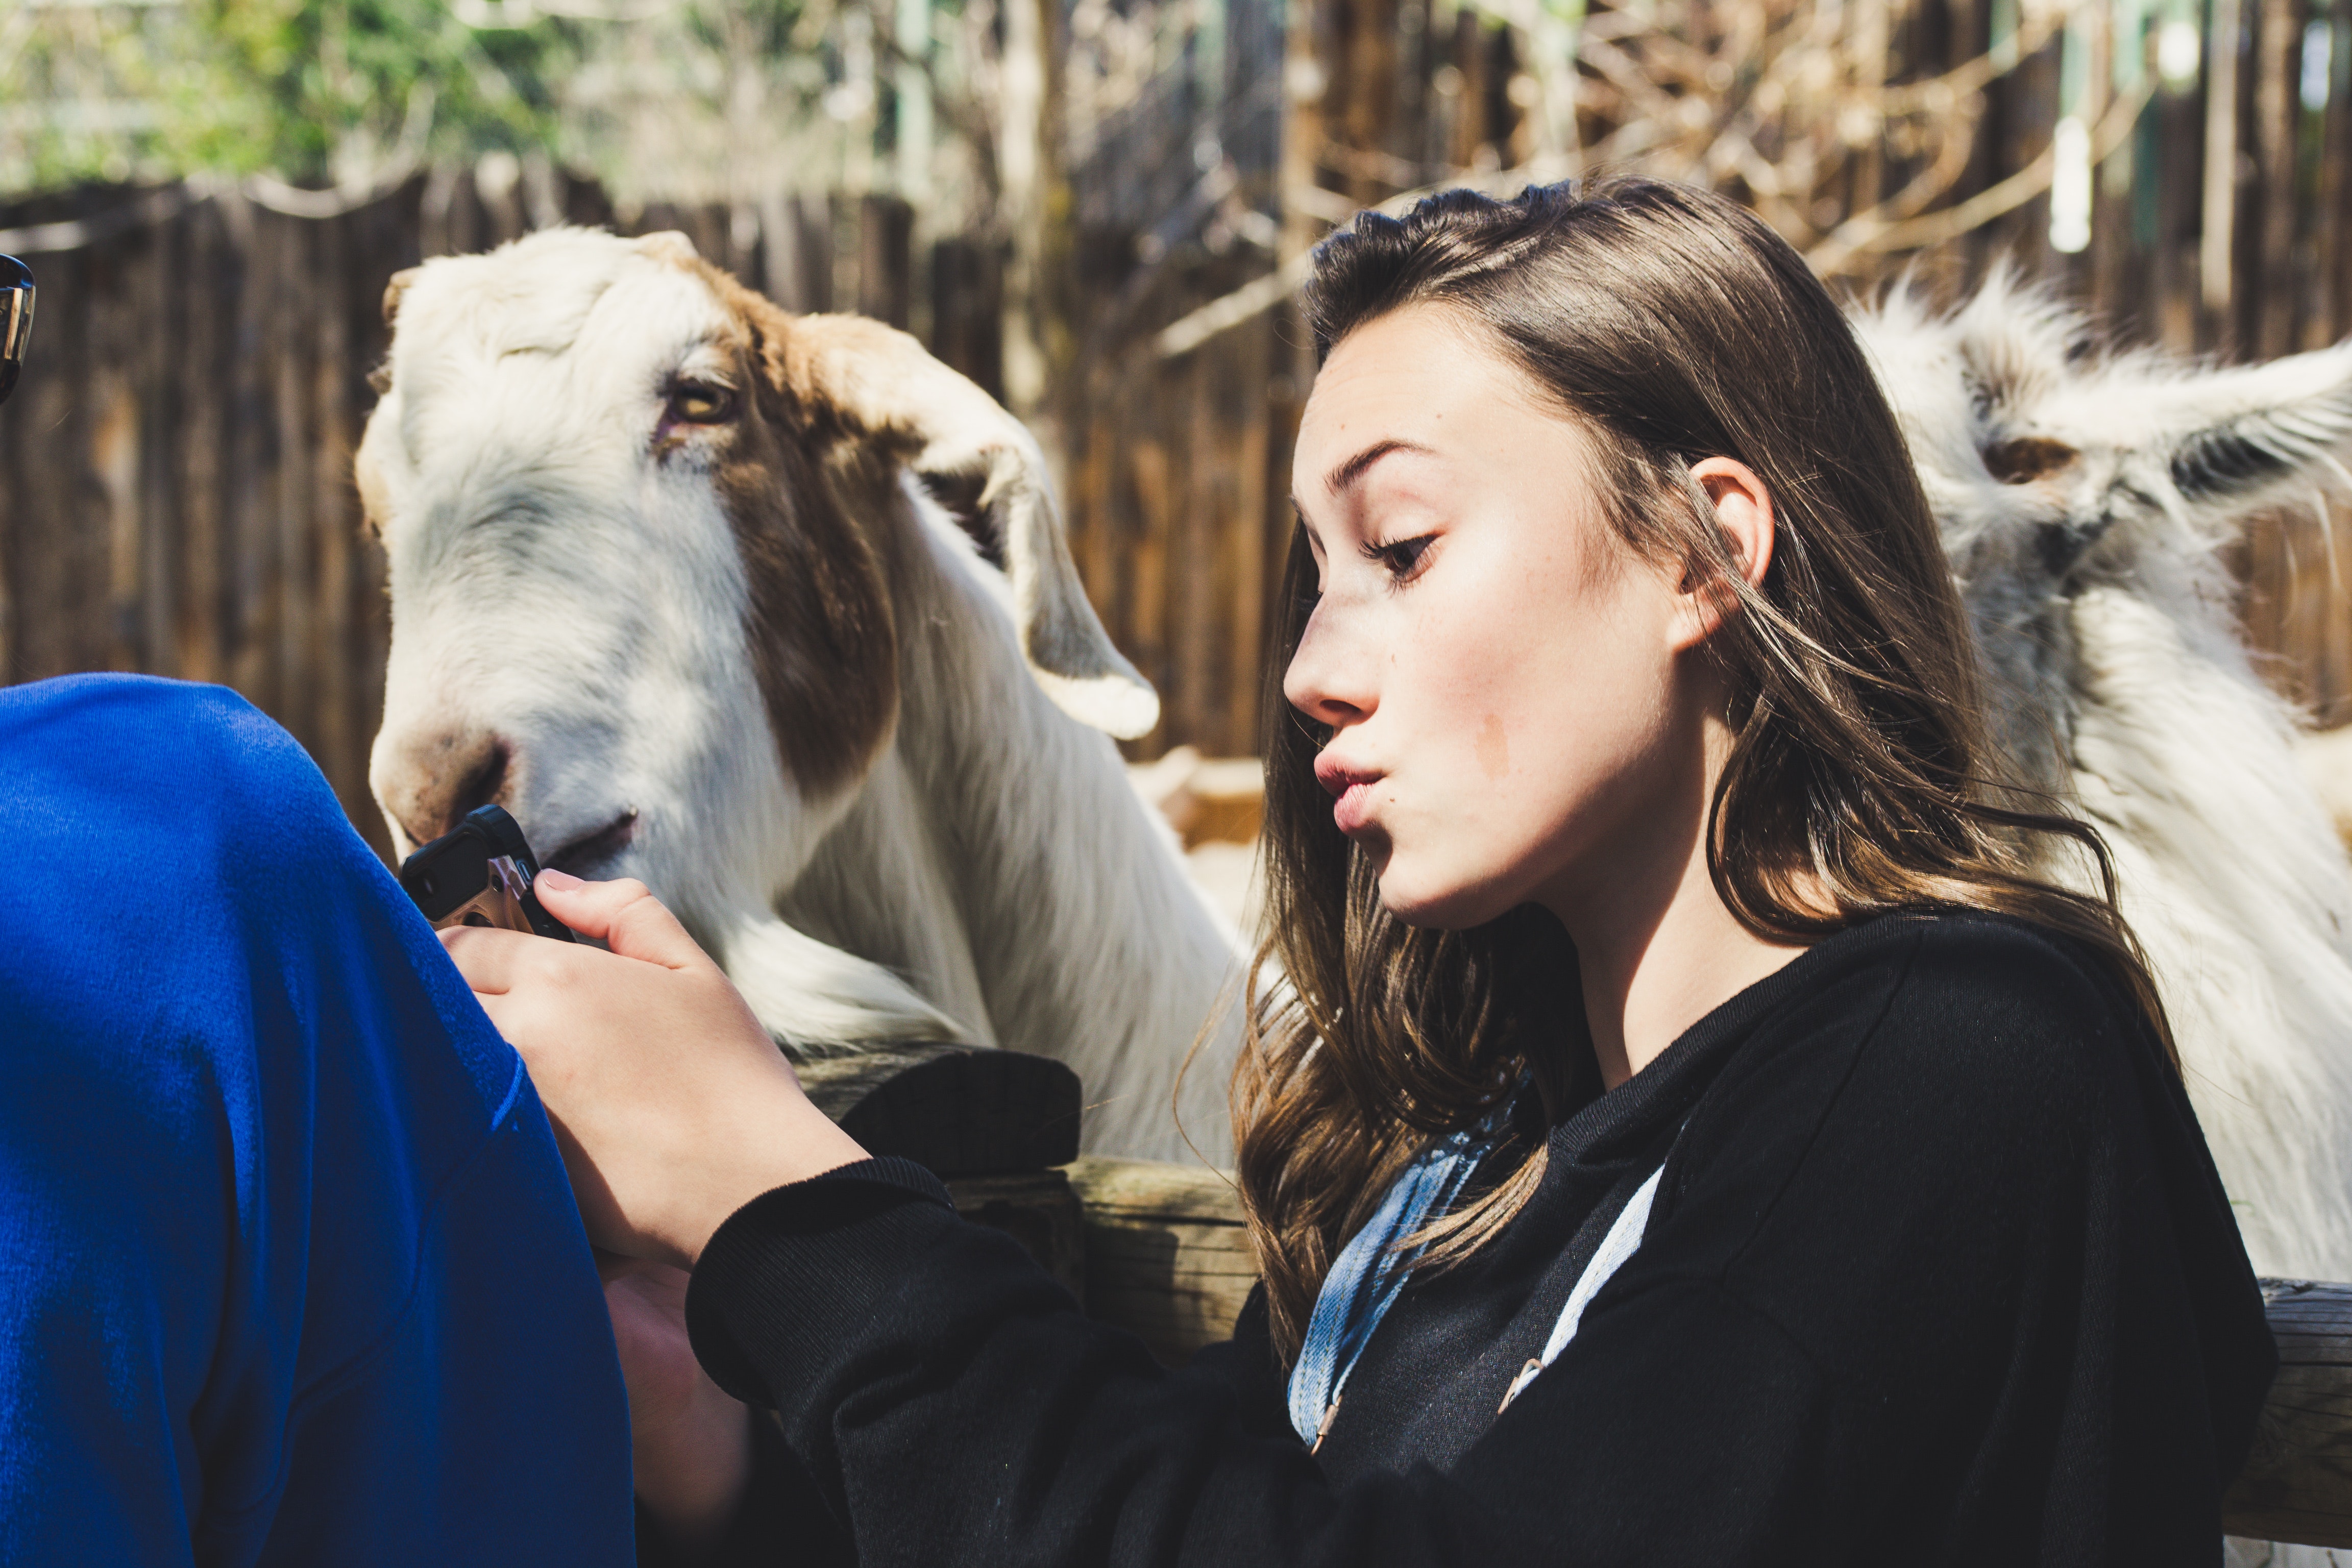 A smiling girl in a black sweatshirt takes a photo of a goat in the zoo